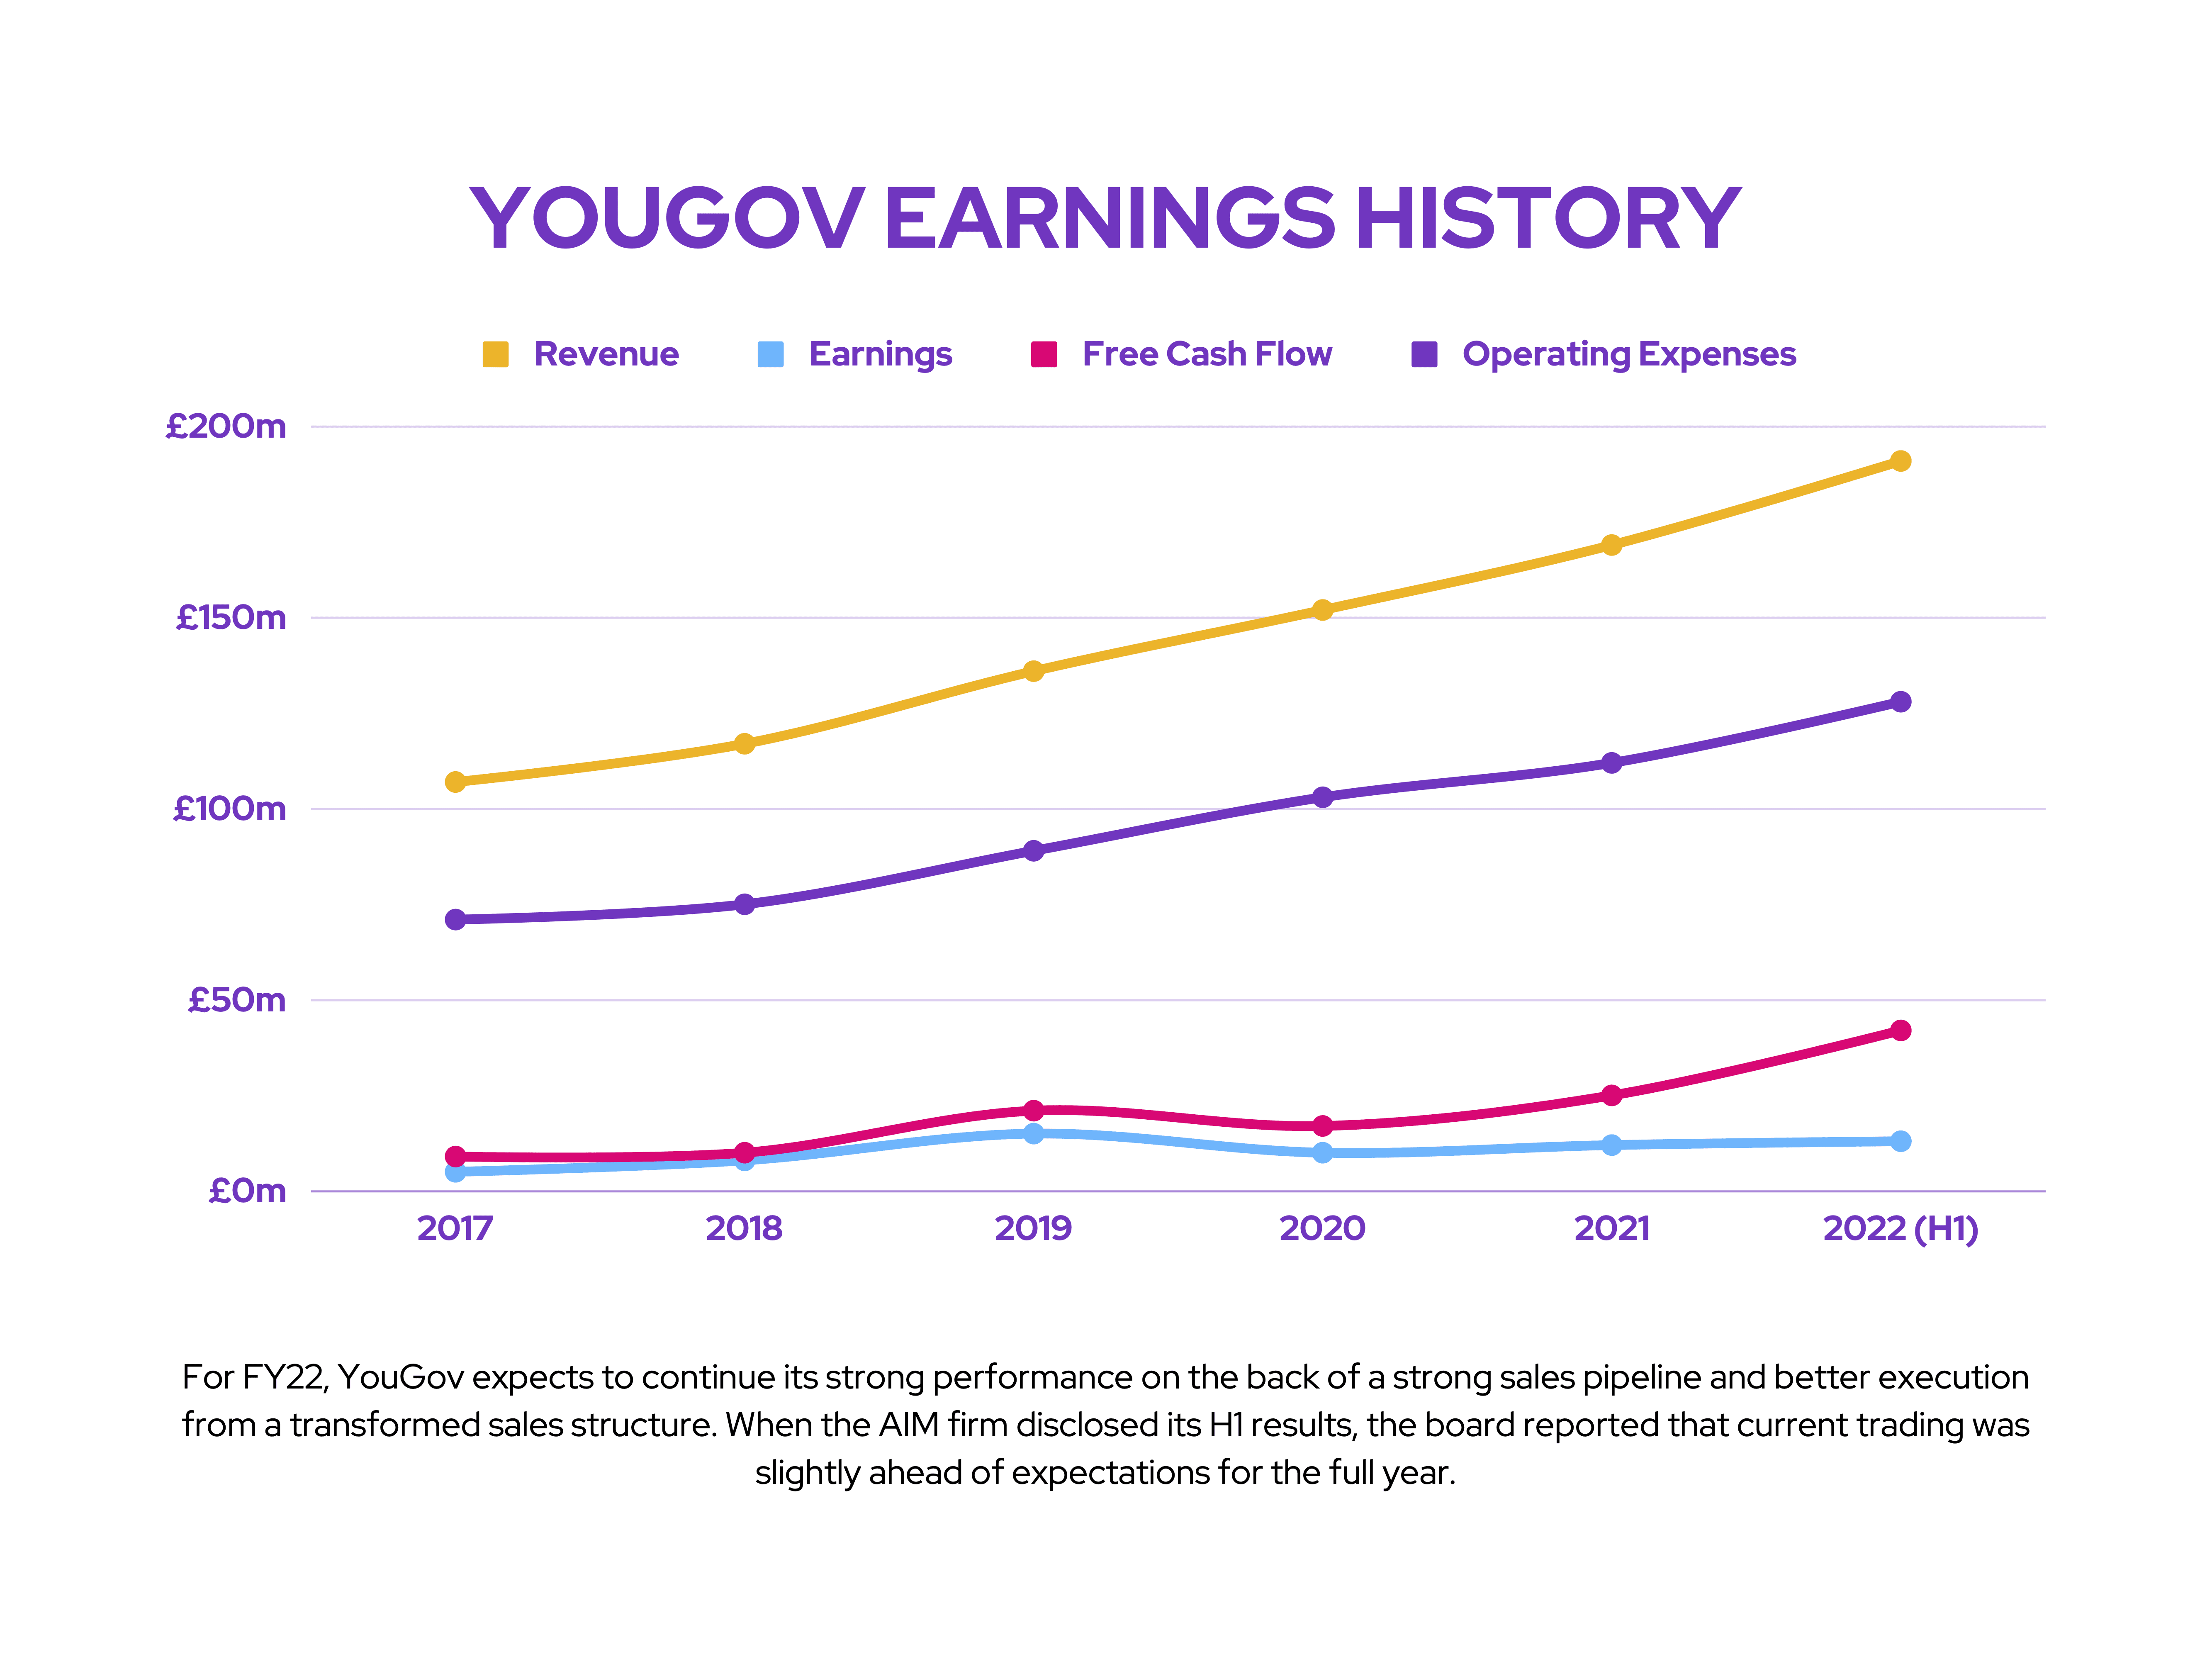 FTSE Earnings Preview: YouGov Earnings History